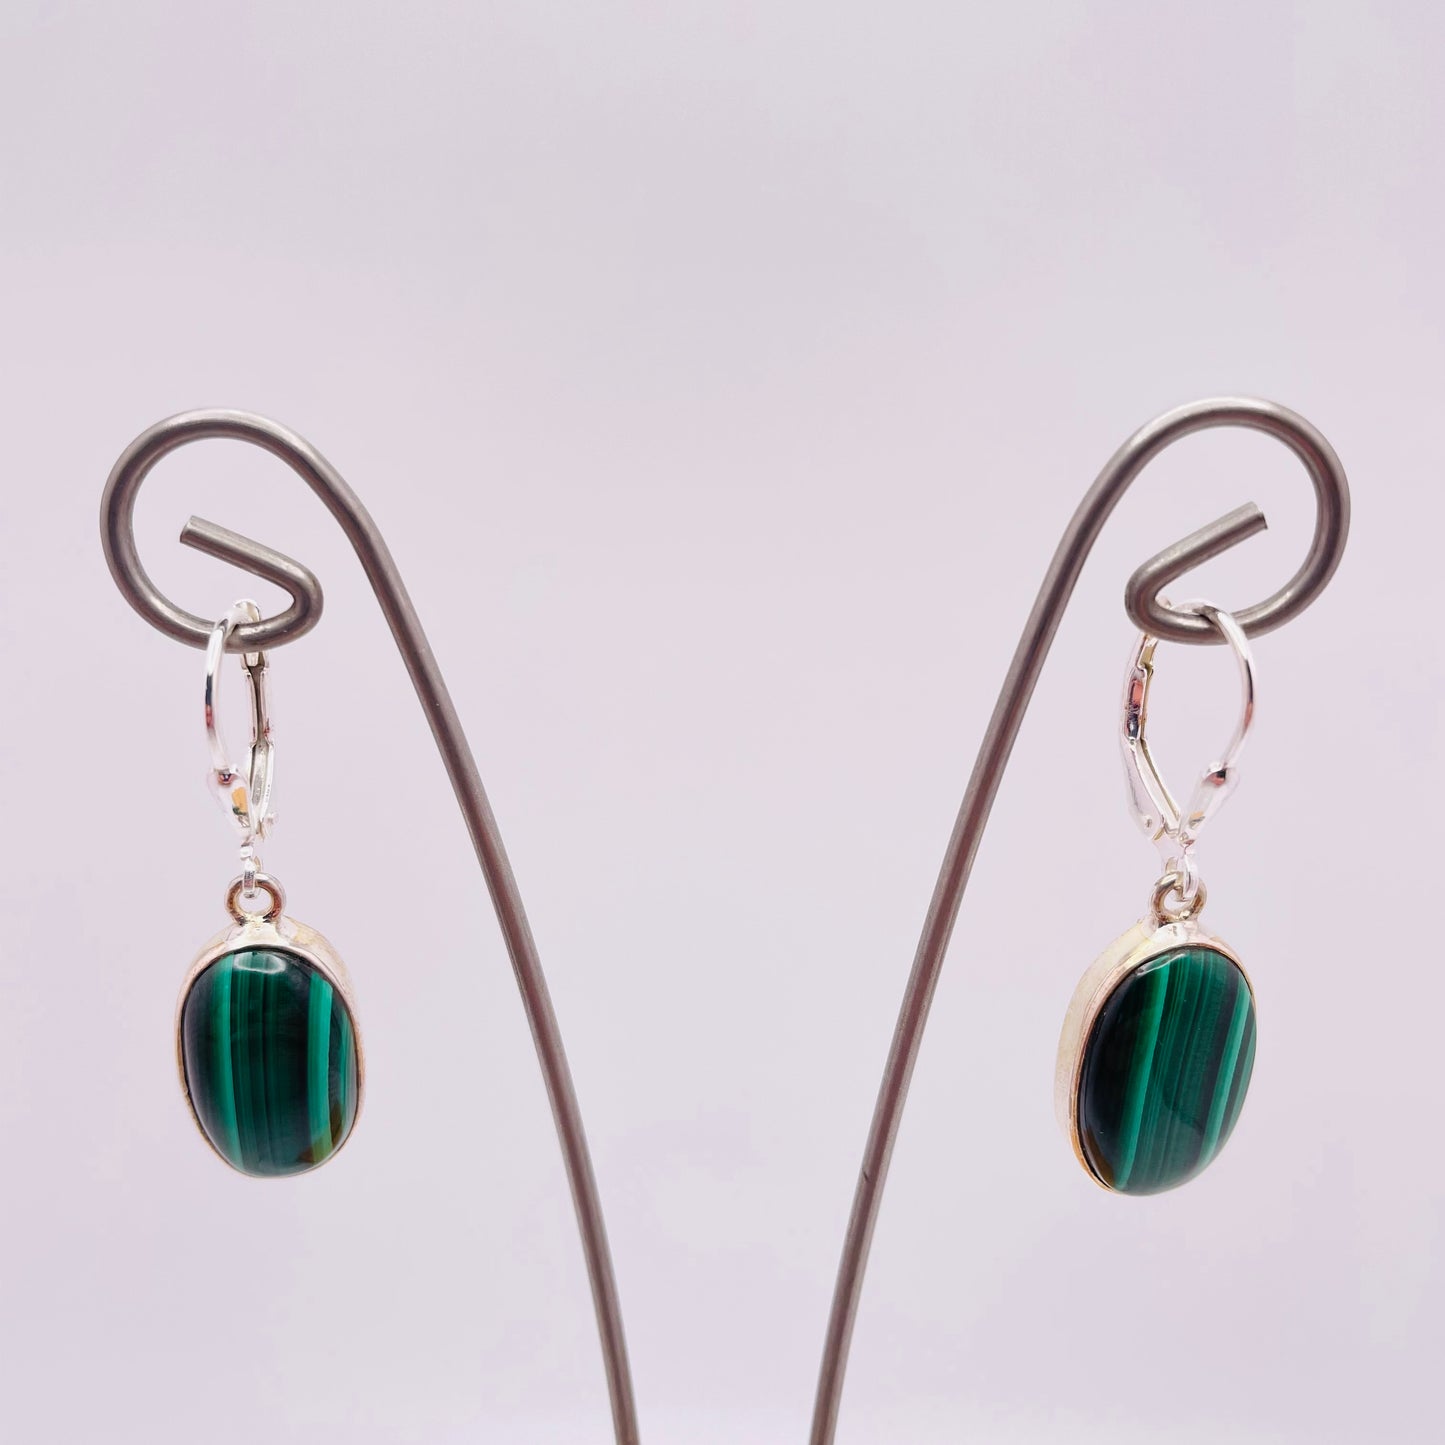 Small oval genuine malachite  set in 925 Sterling Silver. Lever back ear wires.